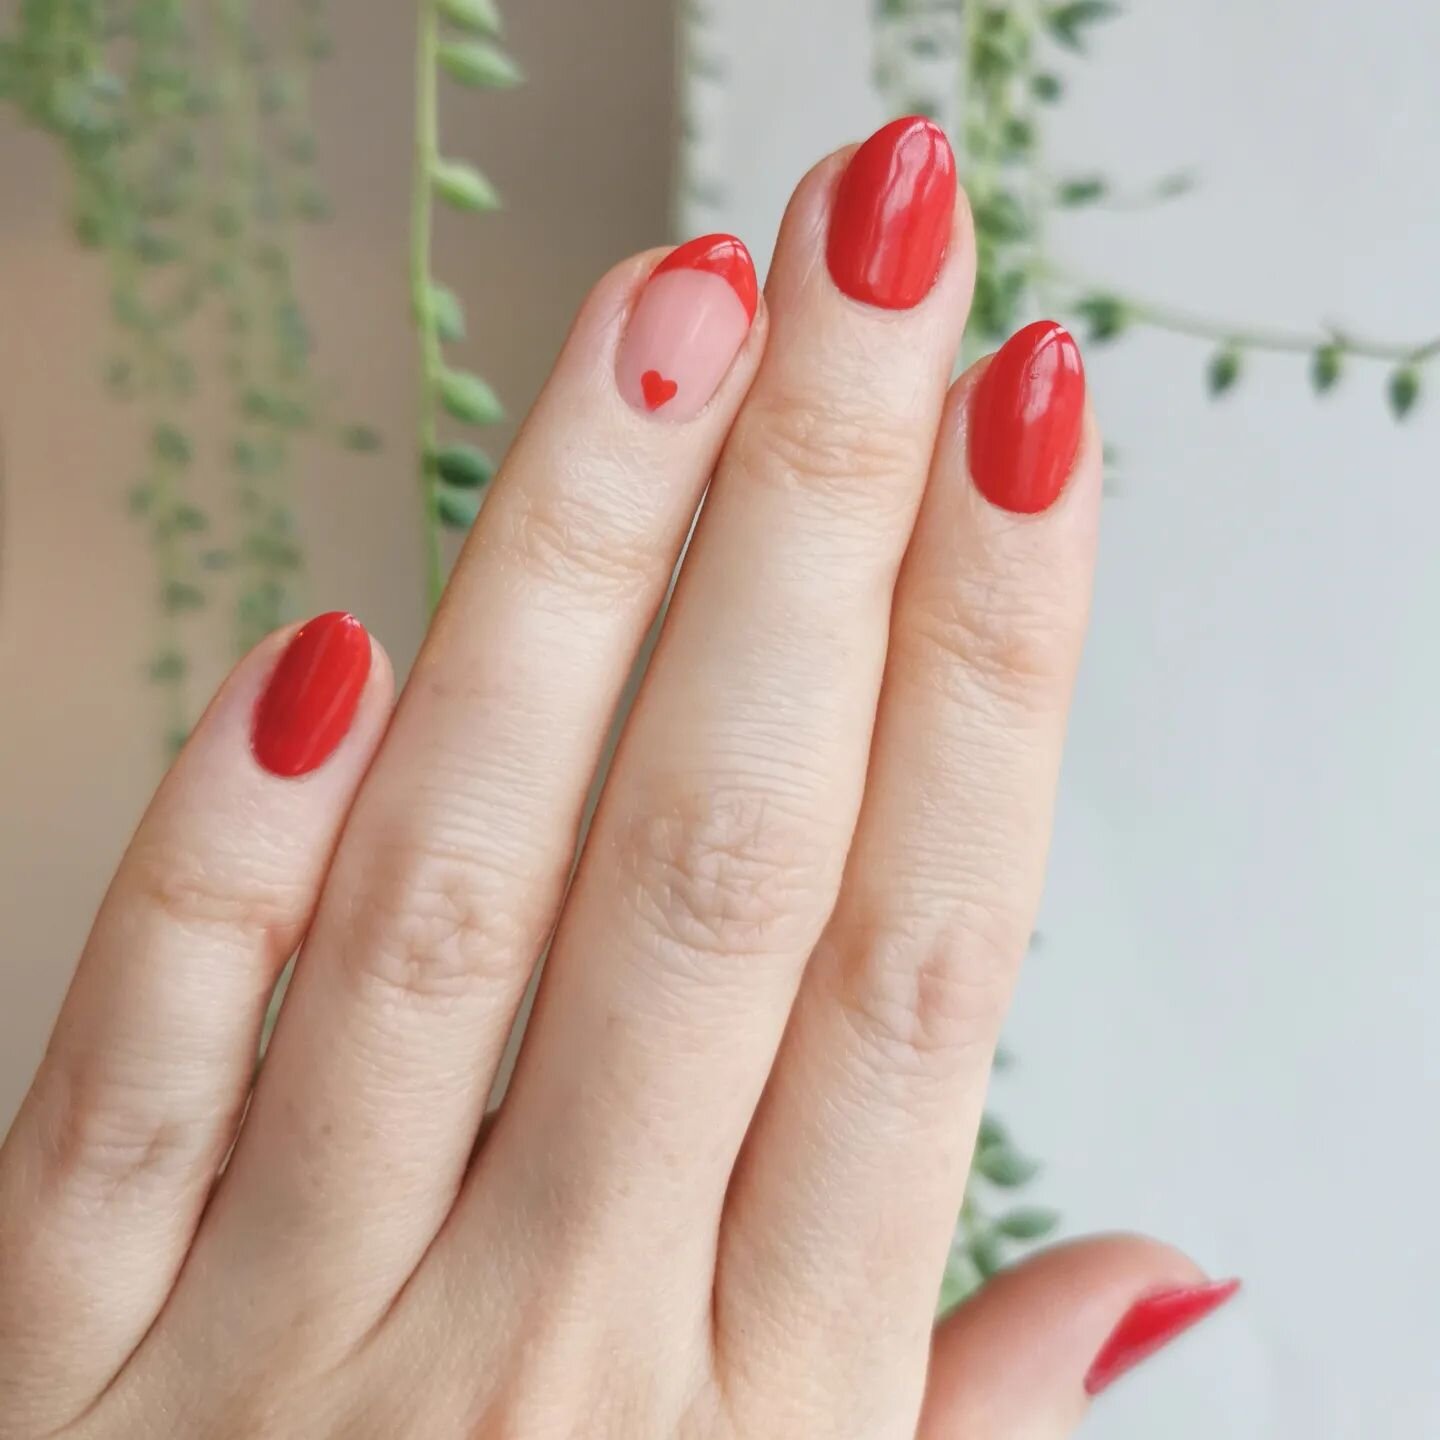 I saw that trend train, I got on it, and I'm not sorry ❤️💅

*disclaimer - I dooo find many Valentines trends/expectations a bit bleugh, but red claws always make me happy whatever the season, so... 😉

#redmanicure #rednailsmakemehappy #rednails❤️ #